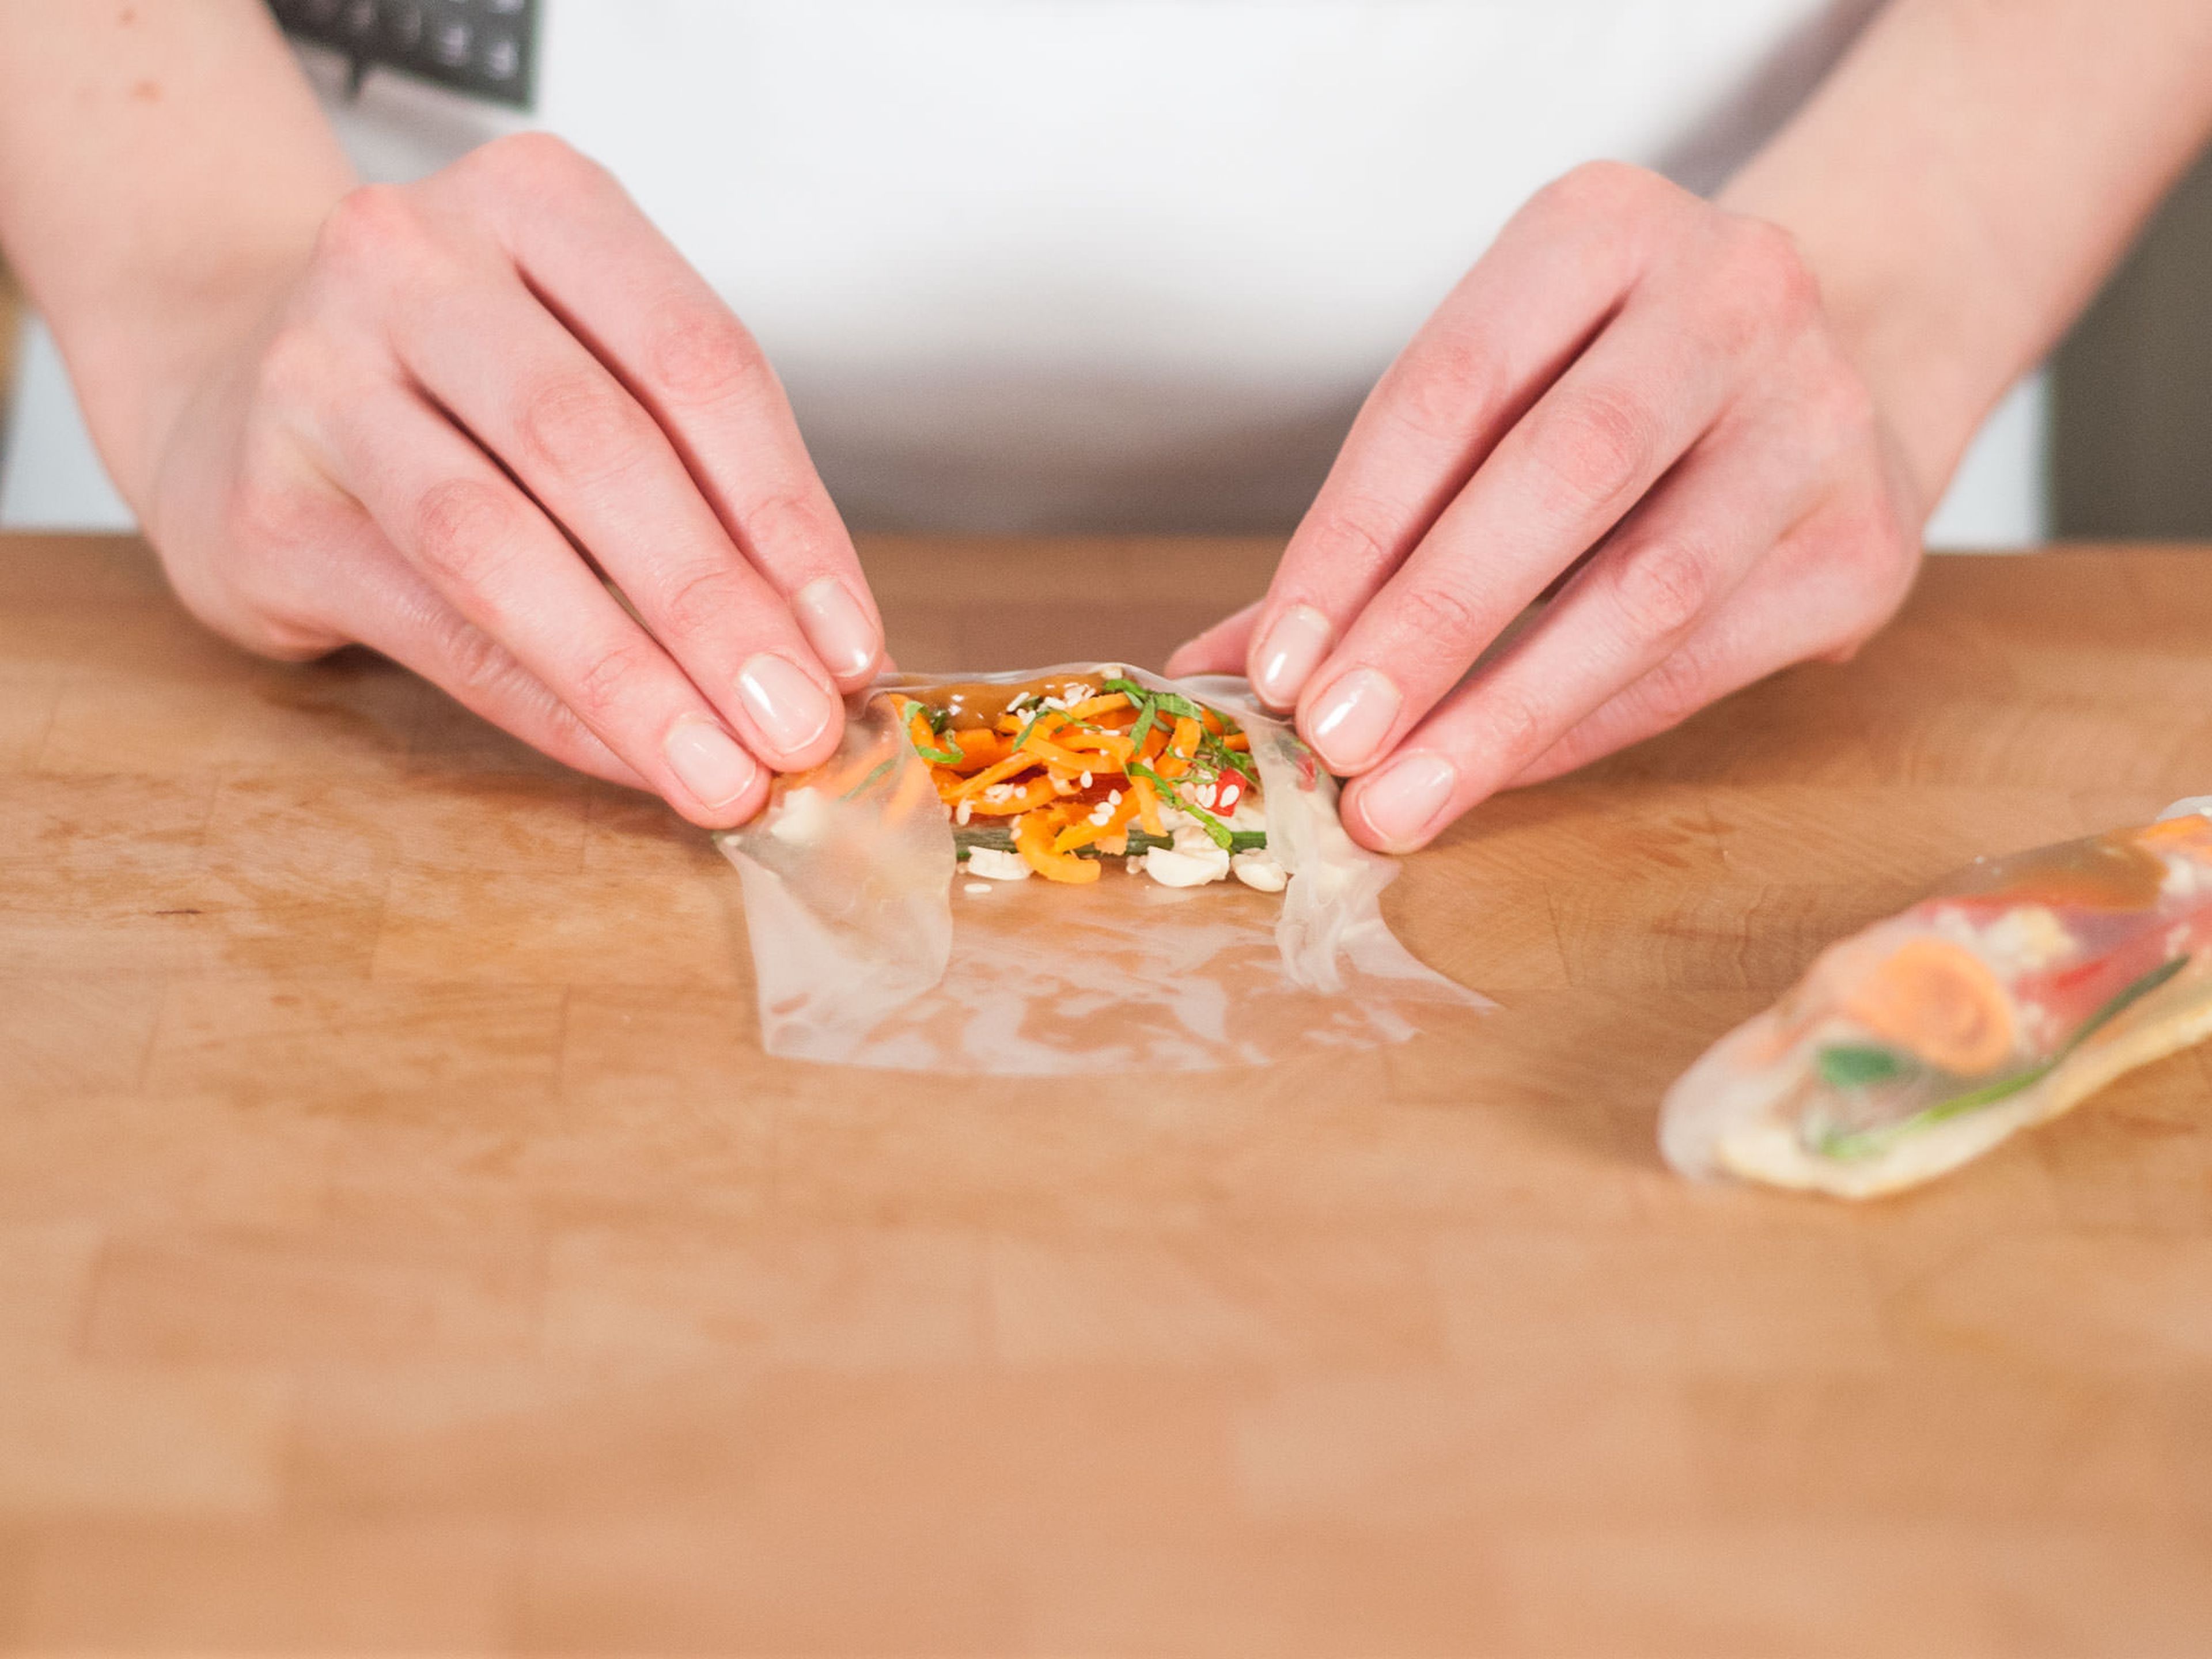 In the same way you wrap a tortilla, fold the edges of the rice wrapper towards the center, bring forward the bottom, and roll forward with your thumbs until the roll is tight. Garnish the roll with sesame seeds and serve with a dipping sauce of your choice. Enjoy!